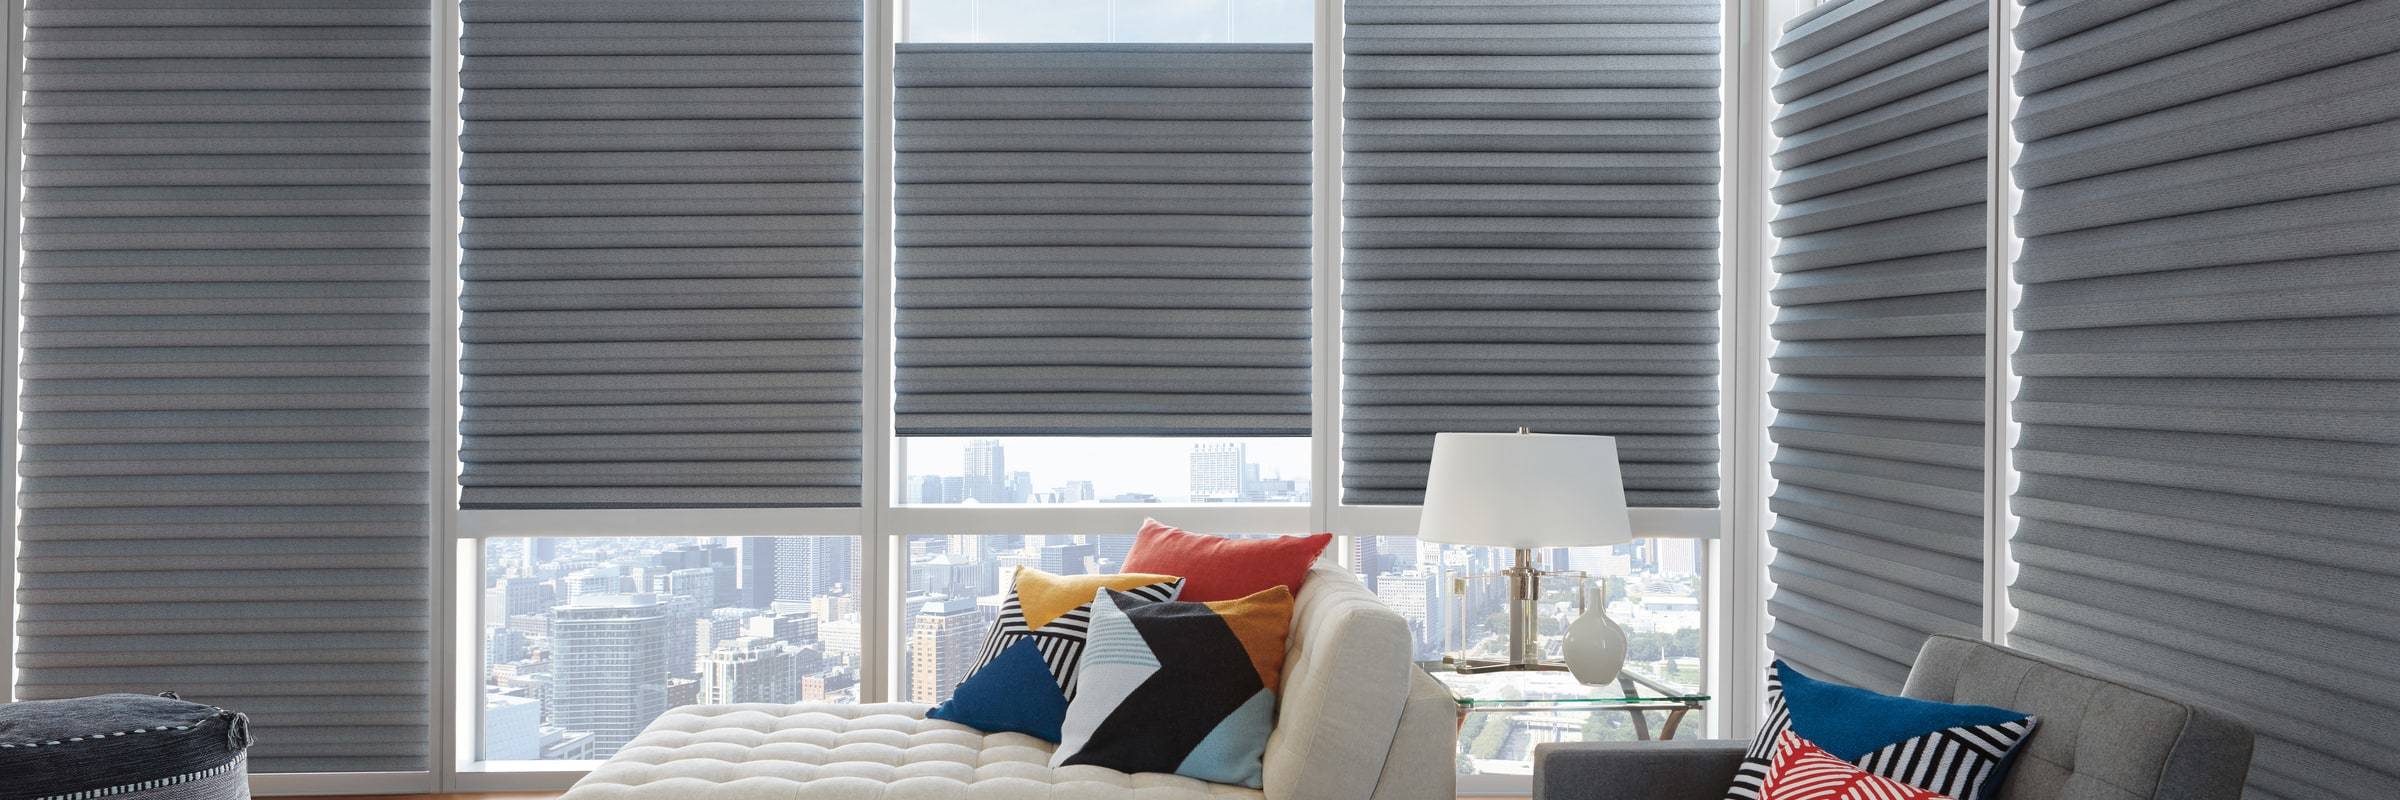 Made of woven and non-woven fabrics, Solera® Soft Shades create a fluid, sculpted look. It is a soft shade with cellular construction available in both light-filtering and room-darkening options. Learn more about Solera® Soft Shades.